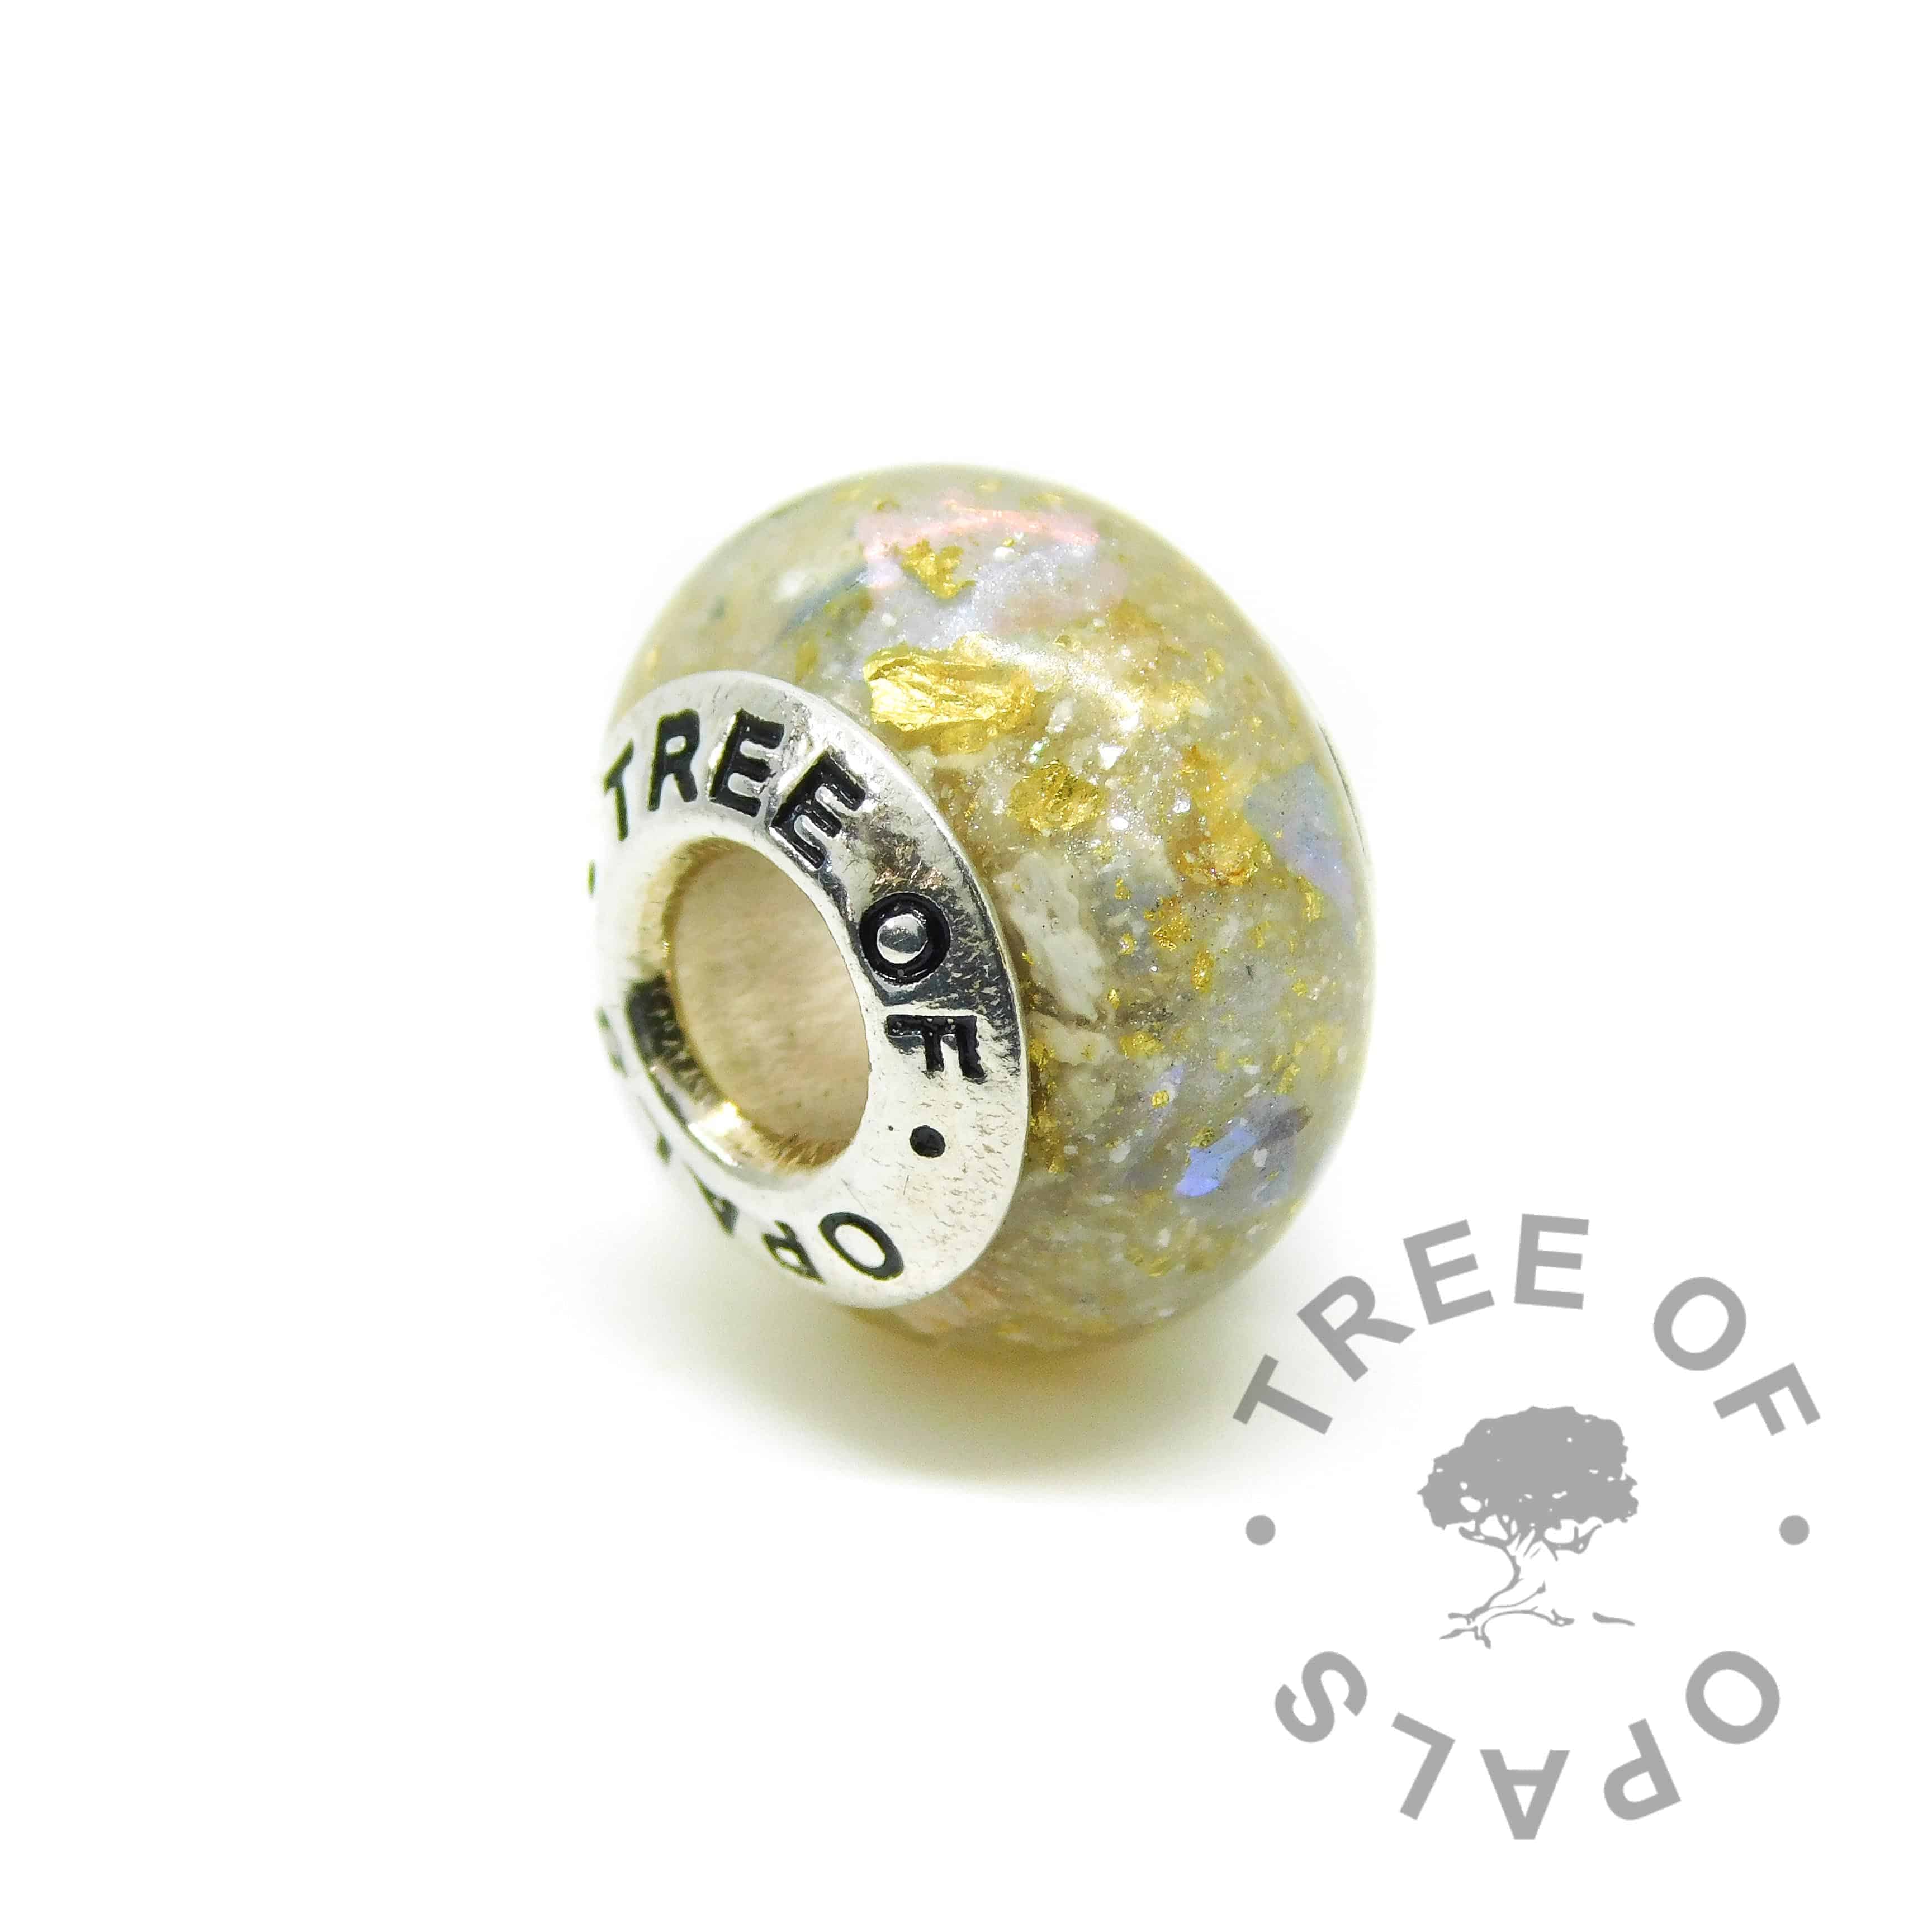 unicorn white cremation ash charm with a little blue opalescent and thick genuine 22ct gold leaf  (special request, just ask in comments)